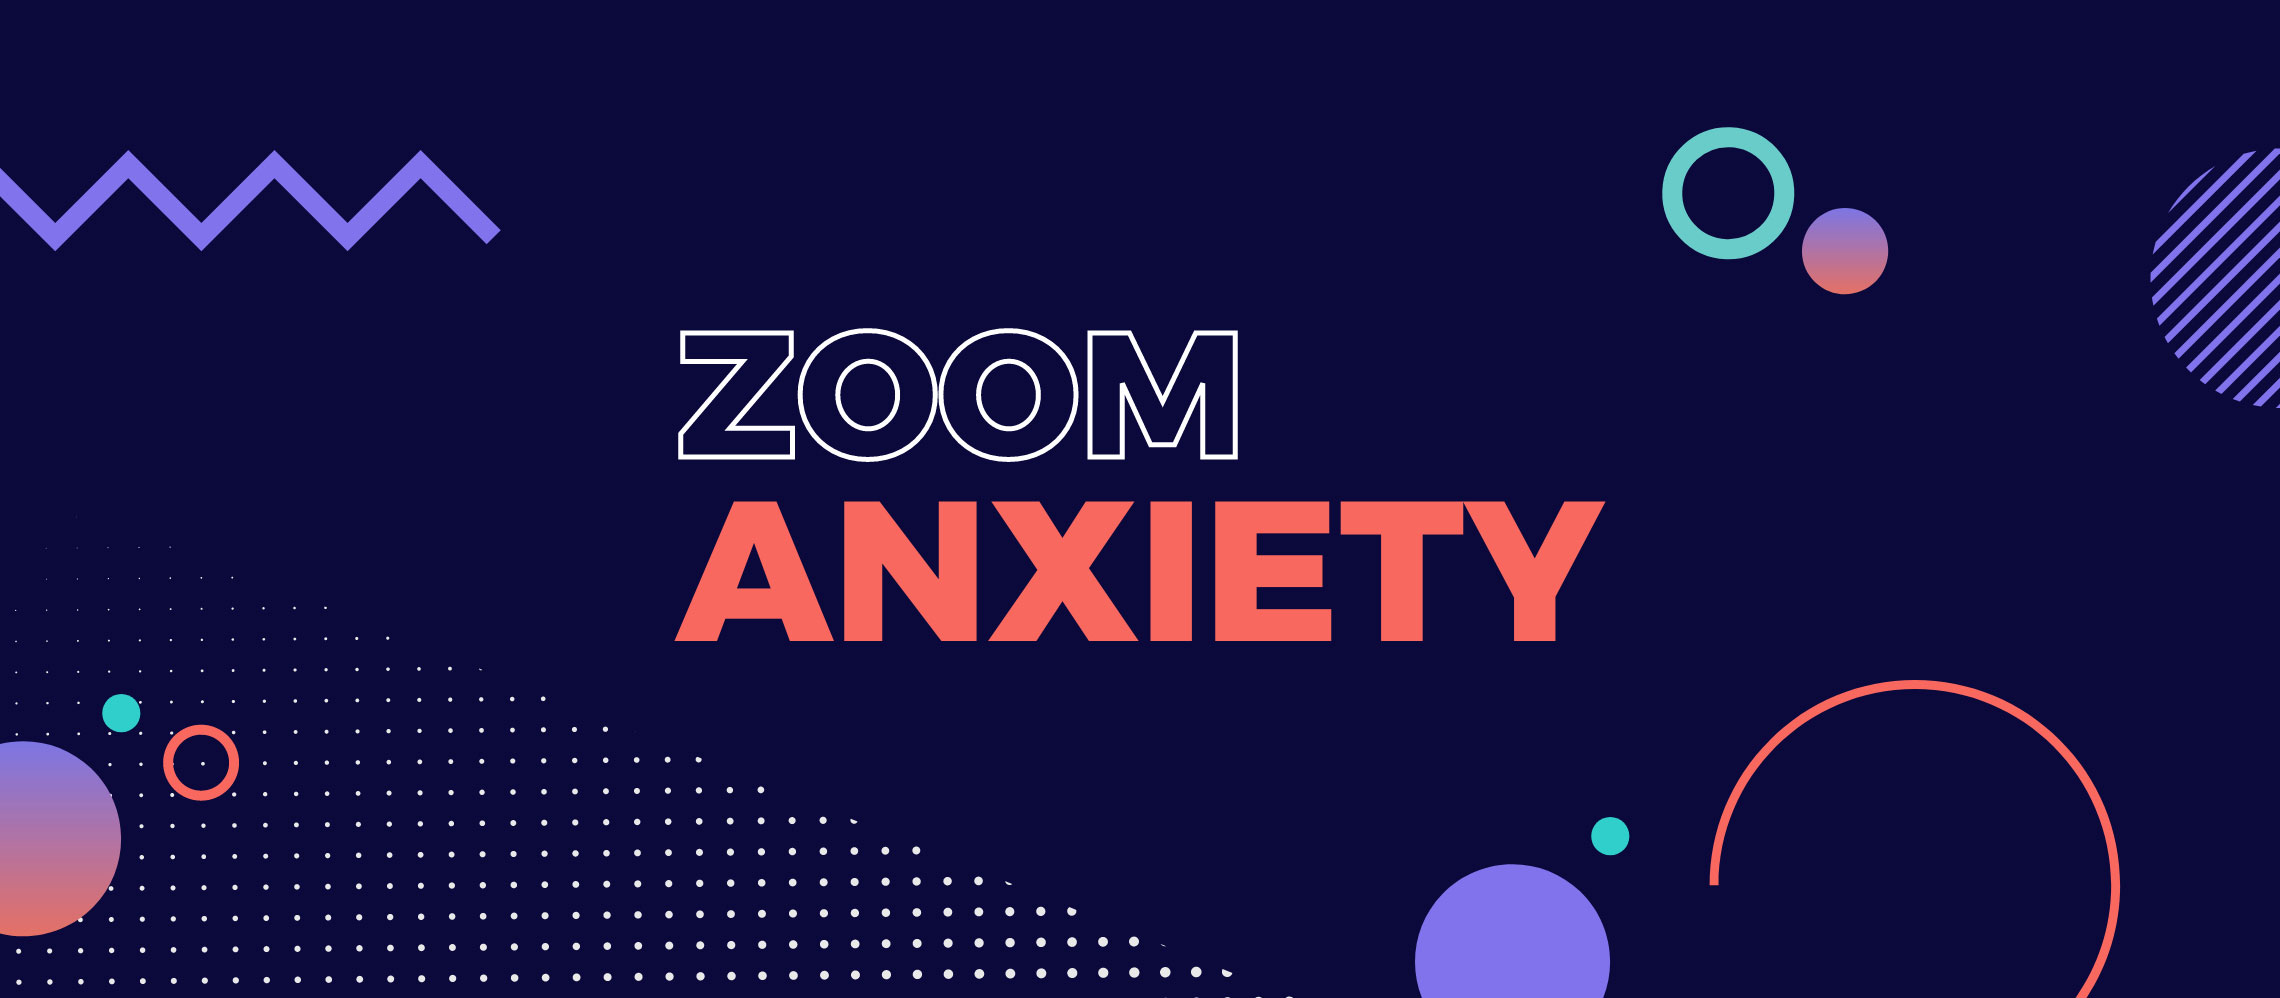 Triggered: What is Zoom Anxiety, and what can we do about it?